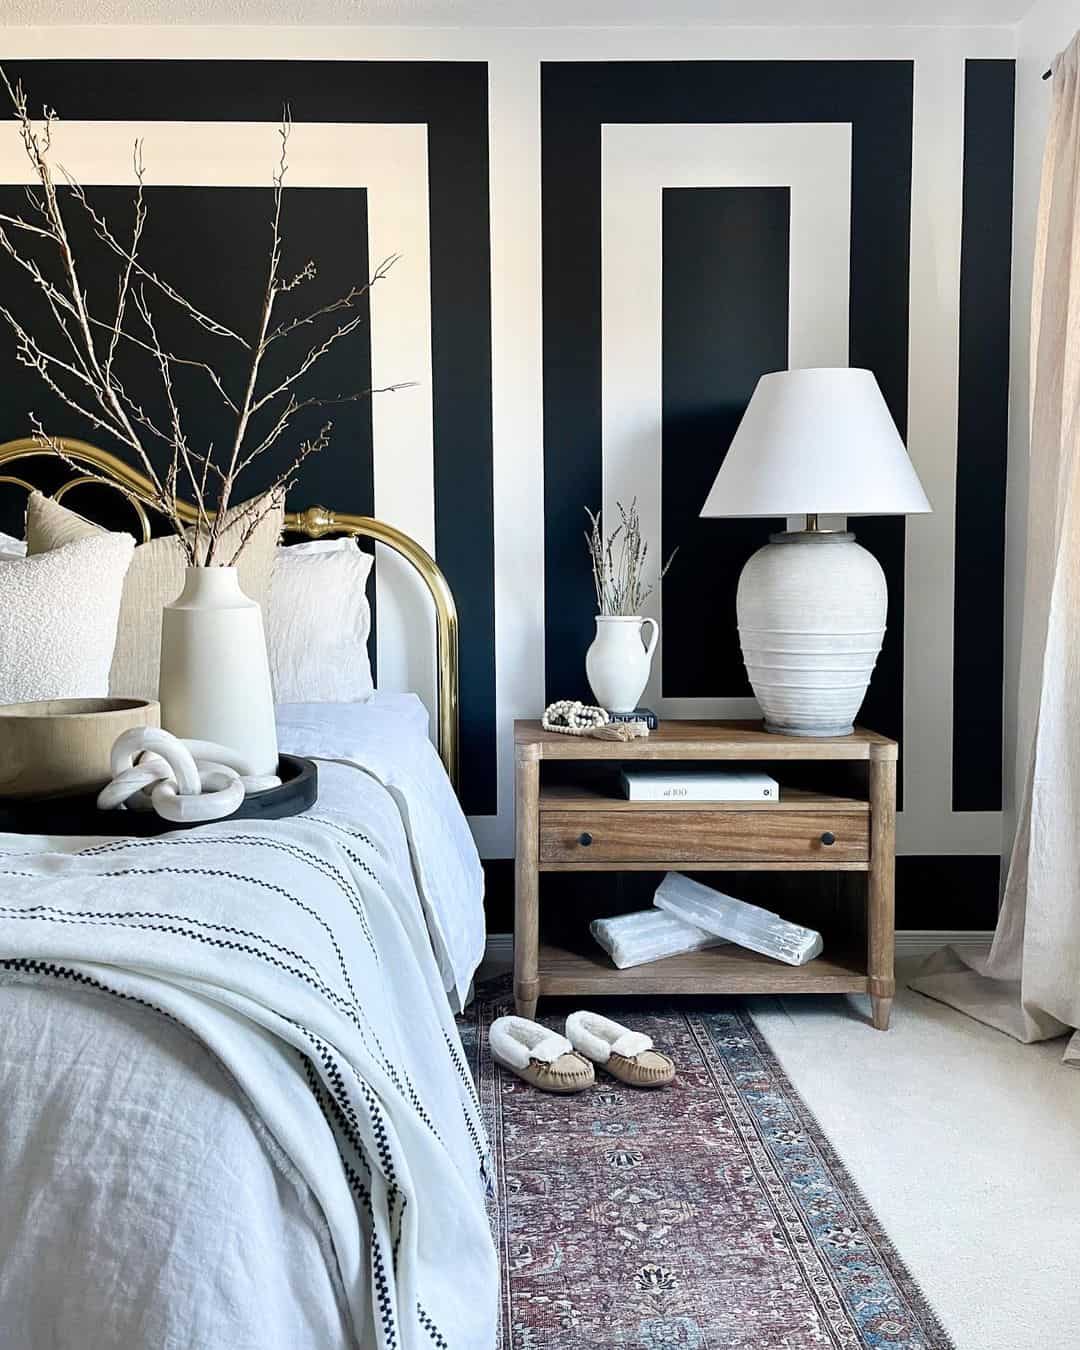 Timeless Monochrome Bedroom with a Geometric Accent Wall